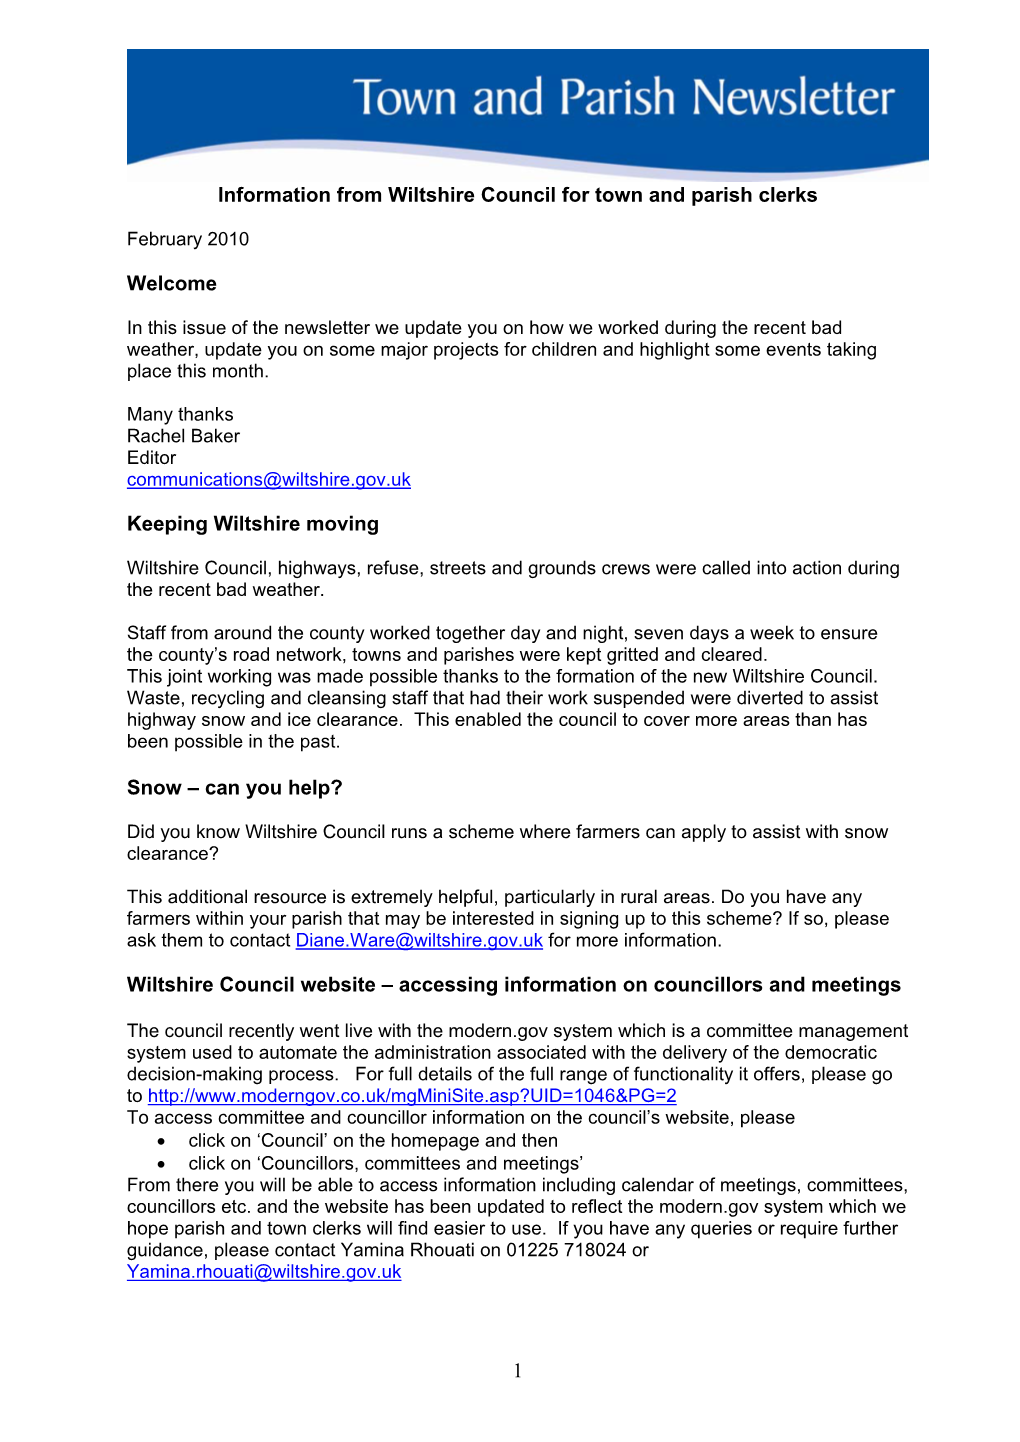 1 Information from Wiltshire Council for Town and Parish Clerks Welcome